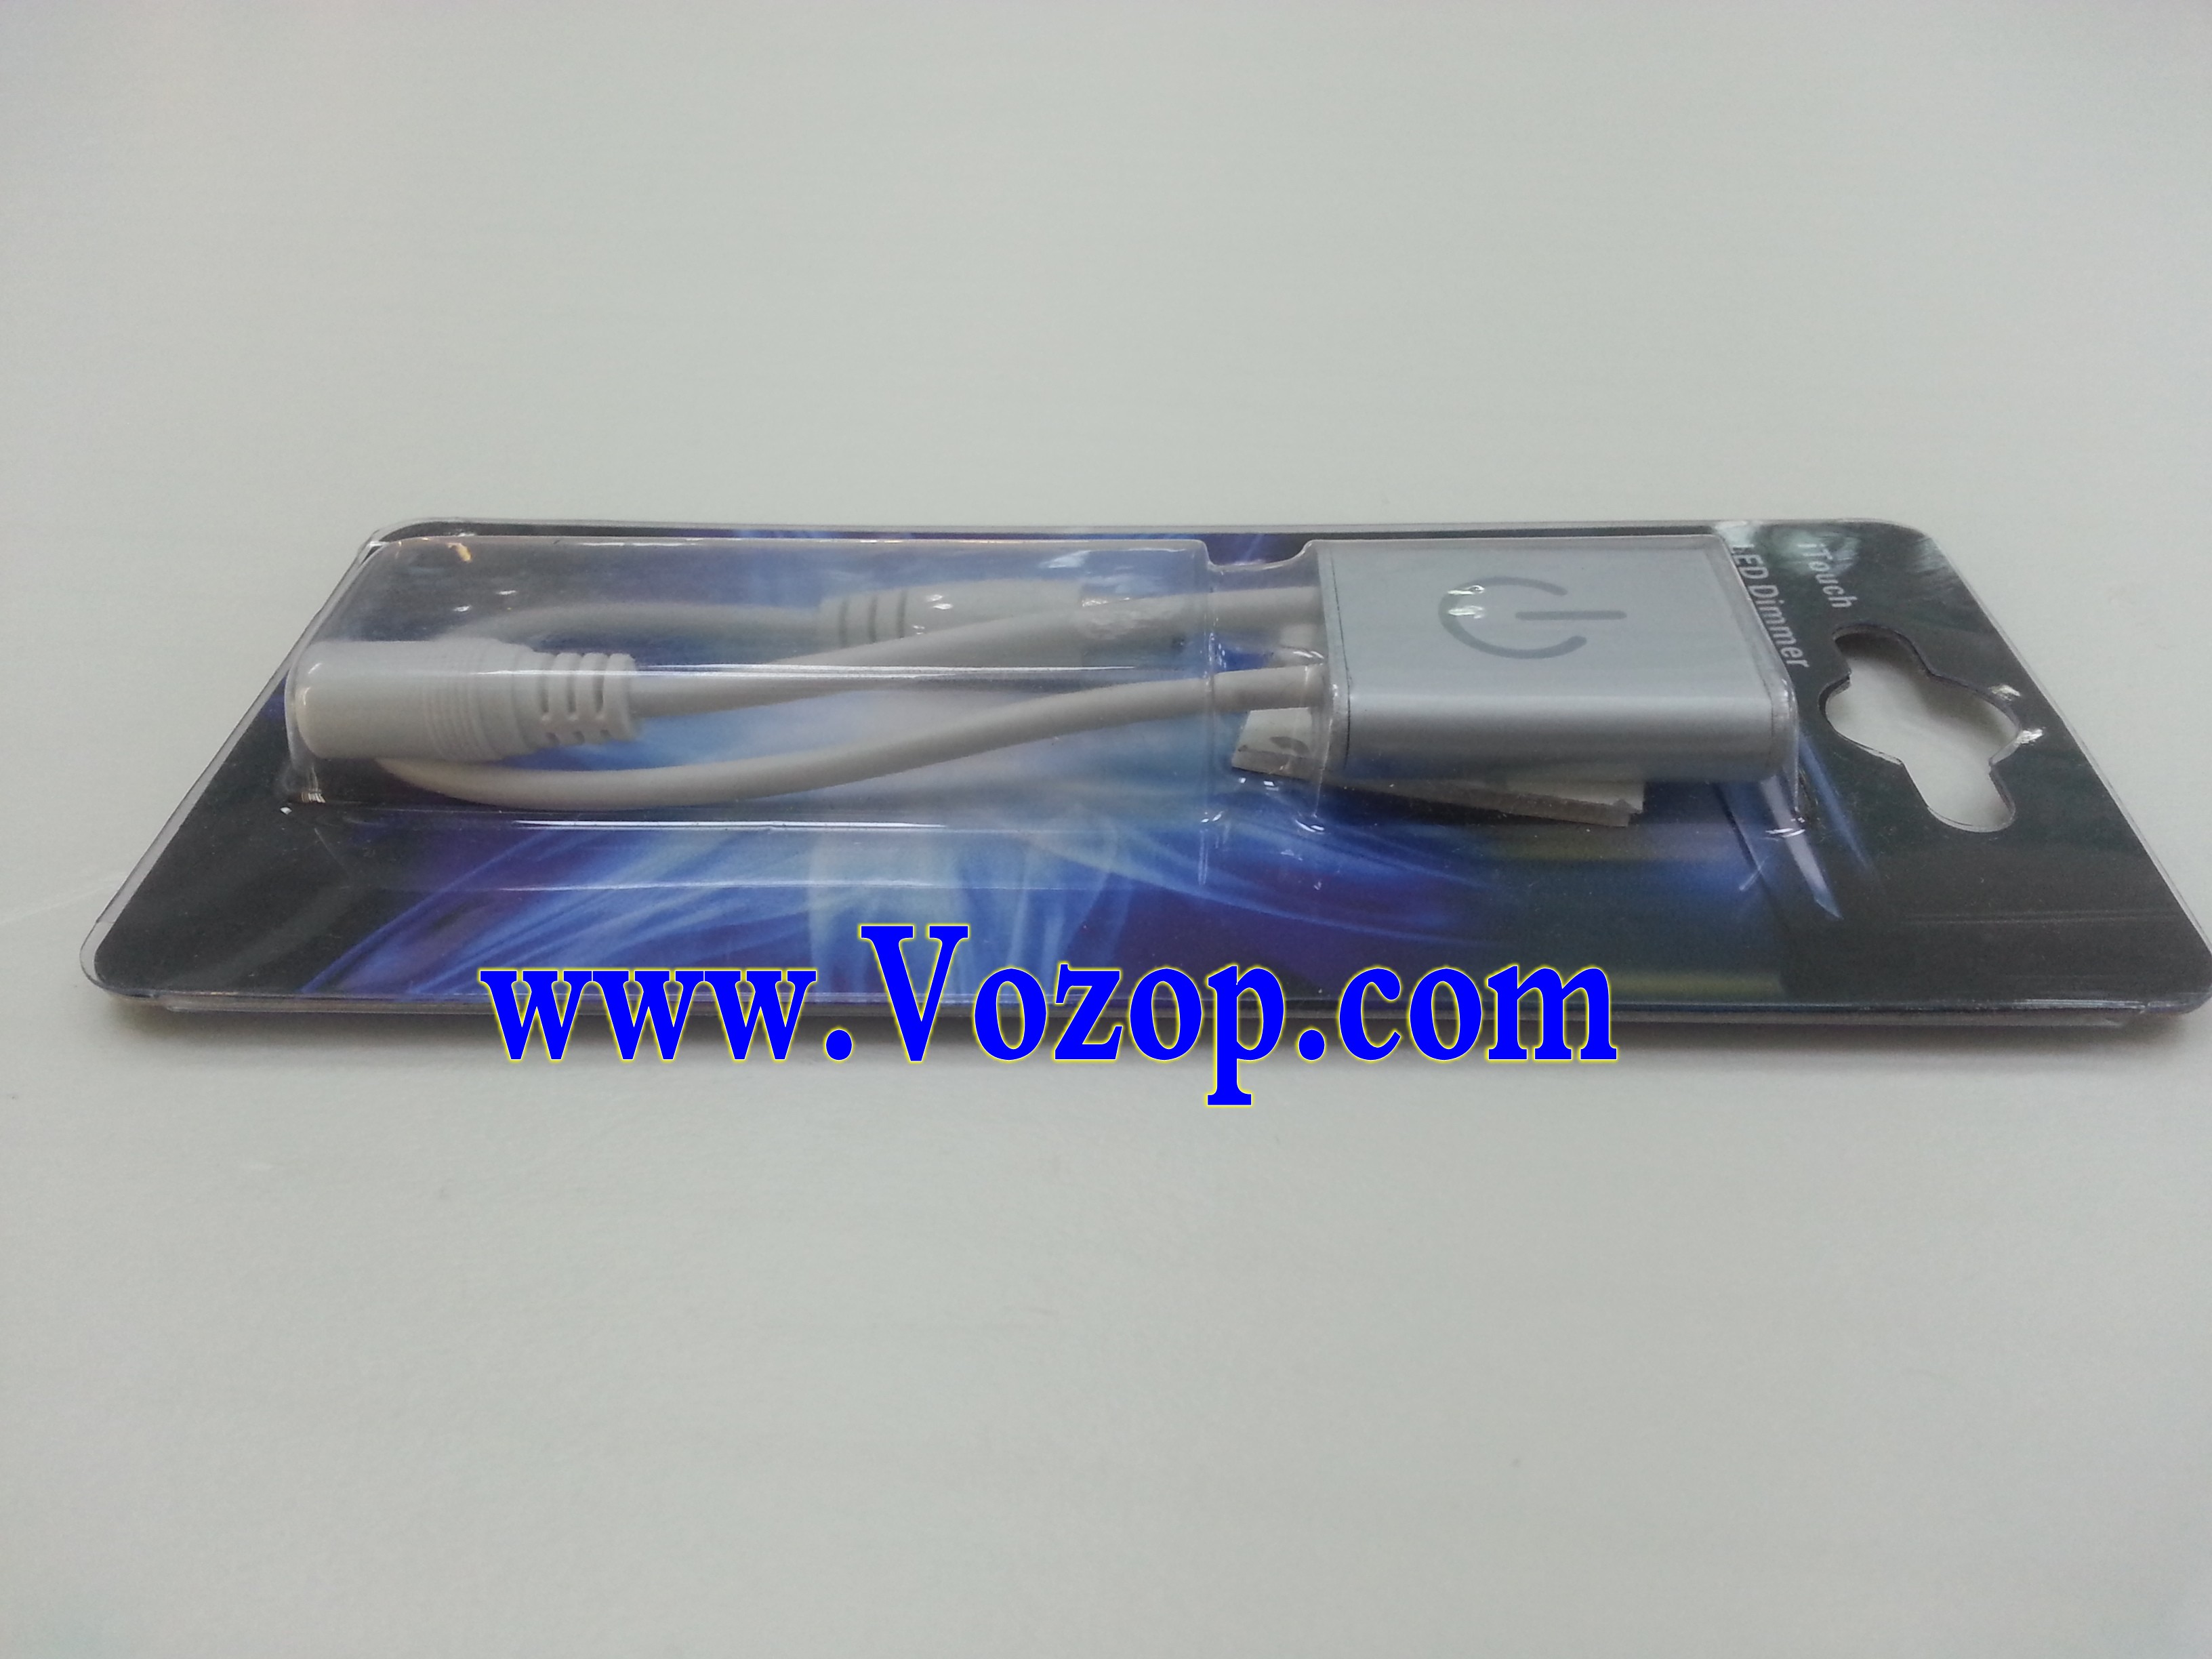 iTouch_Touch_Control_LED_Dimmer_modern_style_wholesale